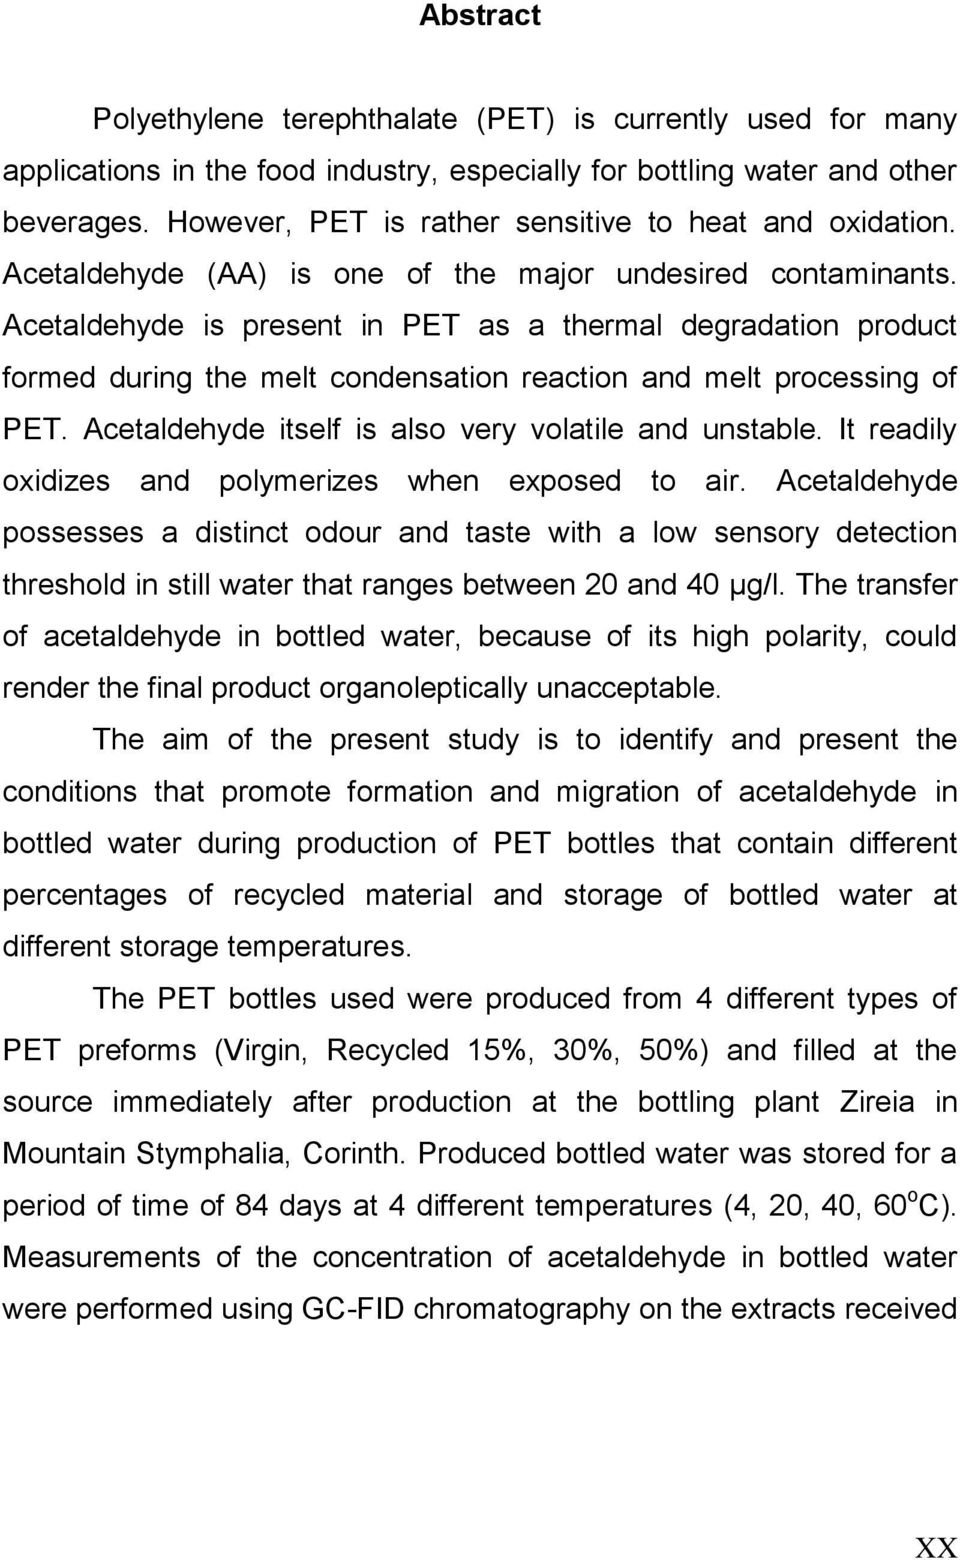 Acetaldehyde is present in PET as a thermal degradation product formed during the melt condensation reaction and melt processing of PET. Acetaldehyde itself is also very volatile and unstable.